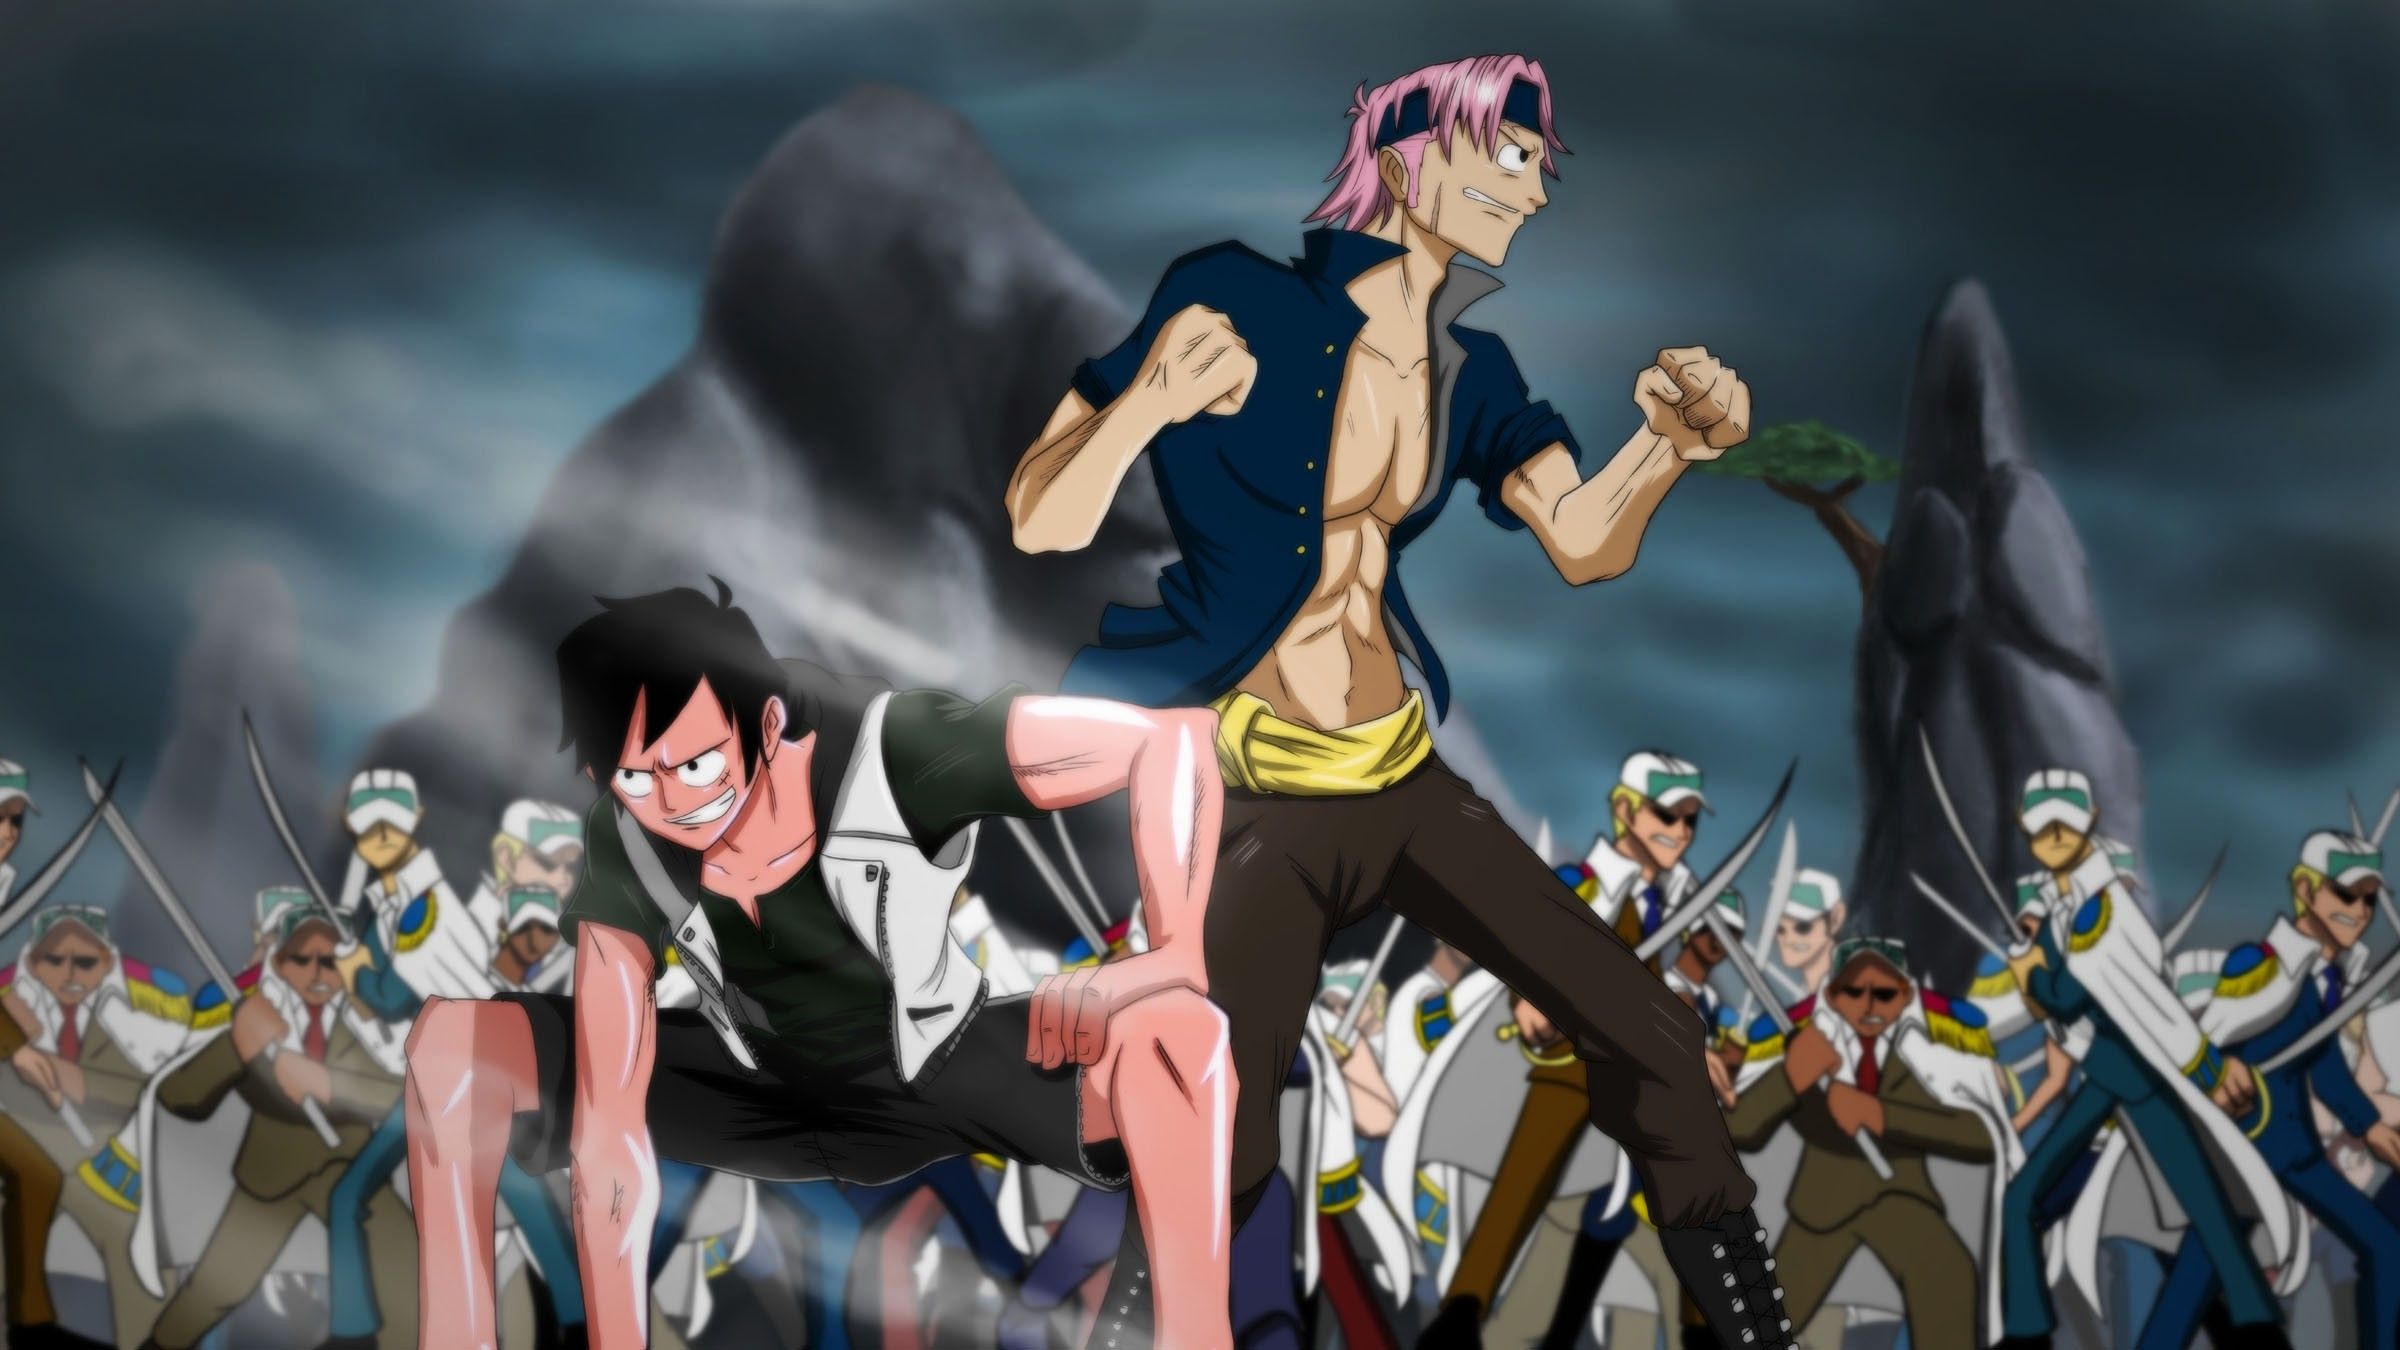 one piece anime anime manga arms monkey d luffy brothers 2400x1350 wallpaper High Quality Wallpaper, High Definition Wallpaper